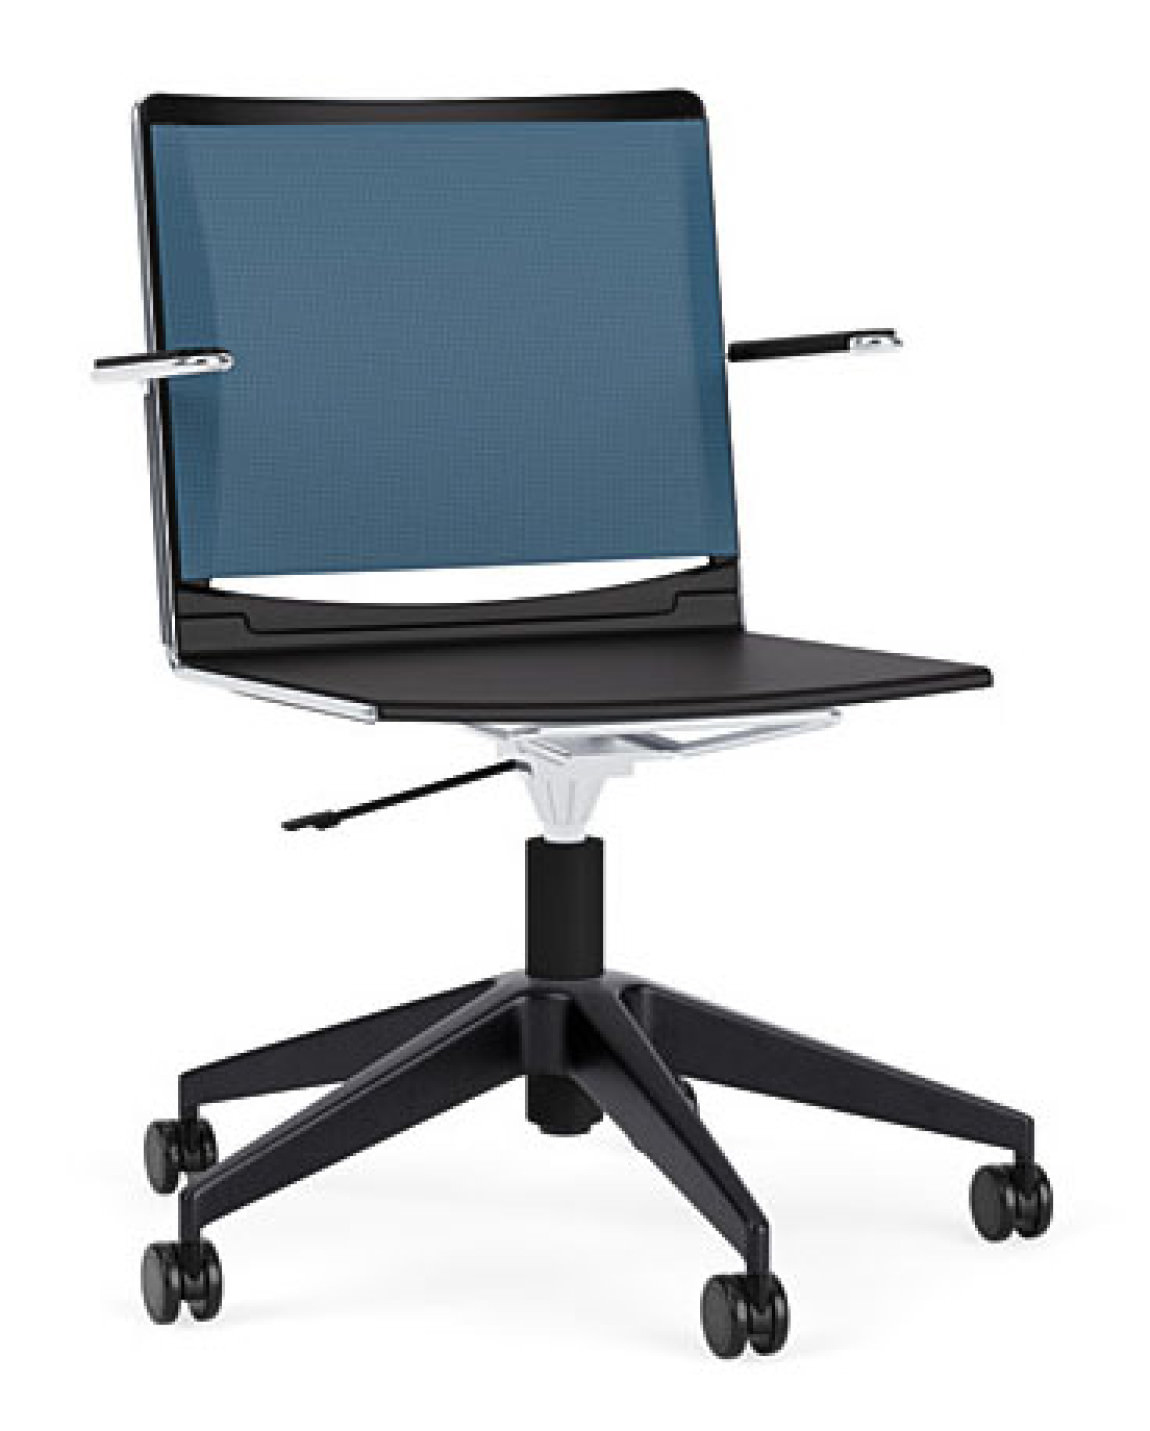 Mesh Back Conference Room Chair